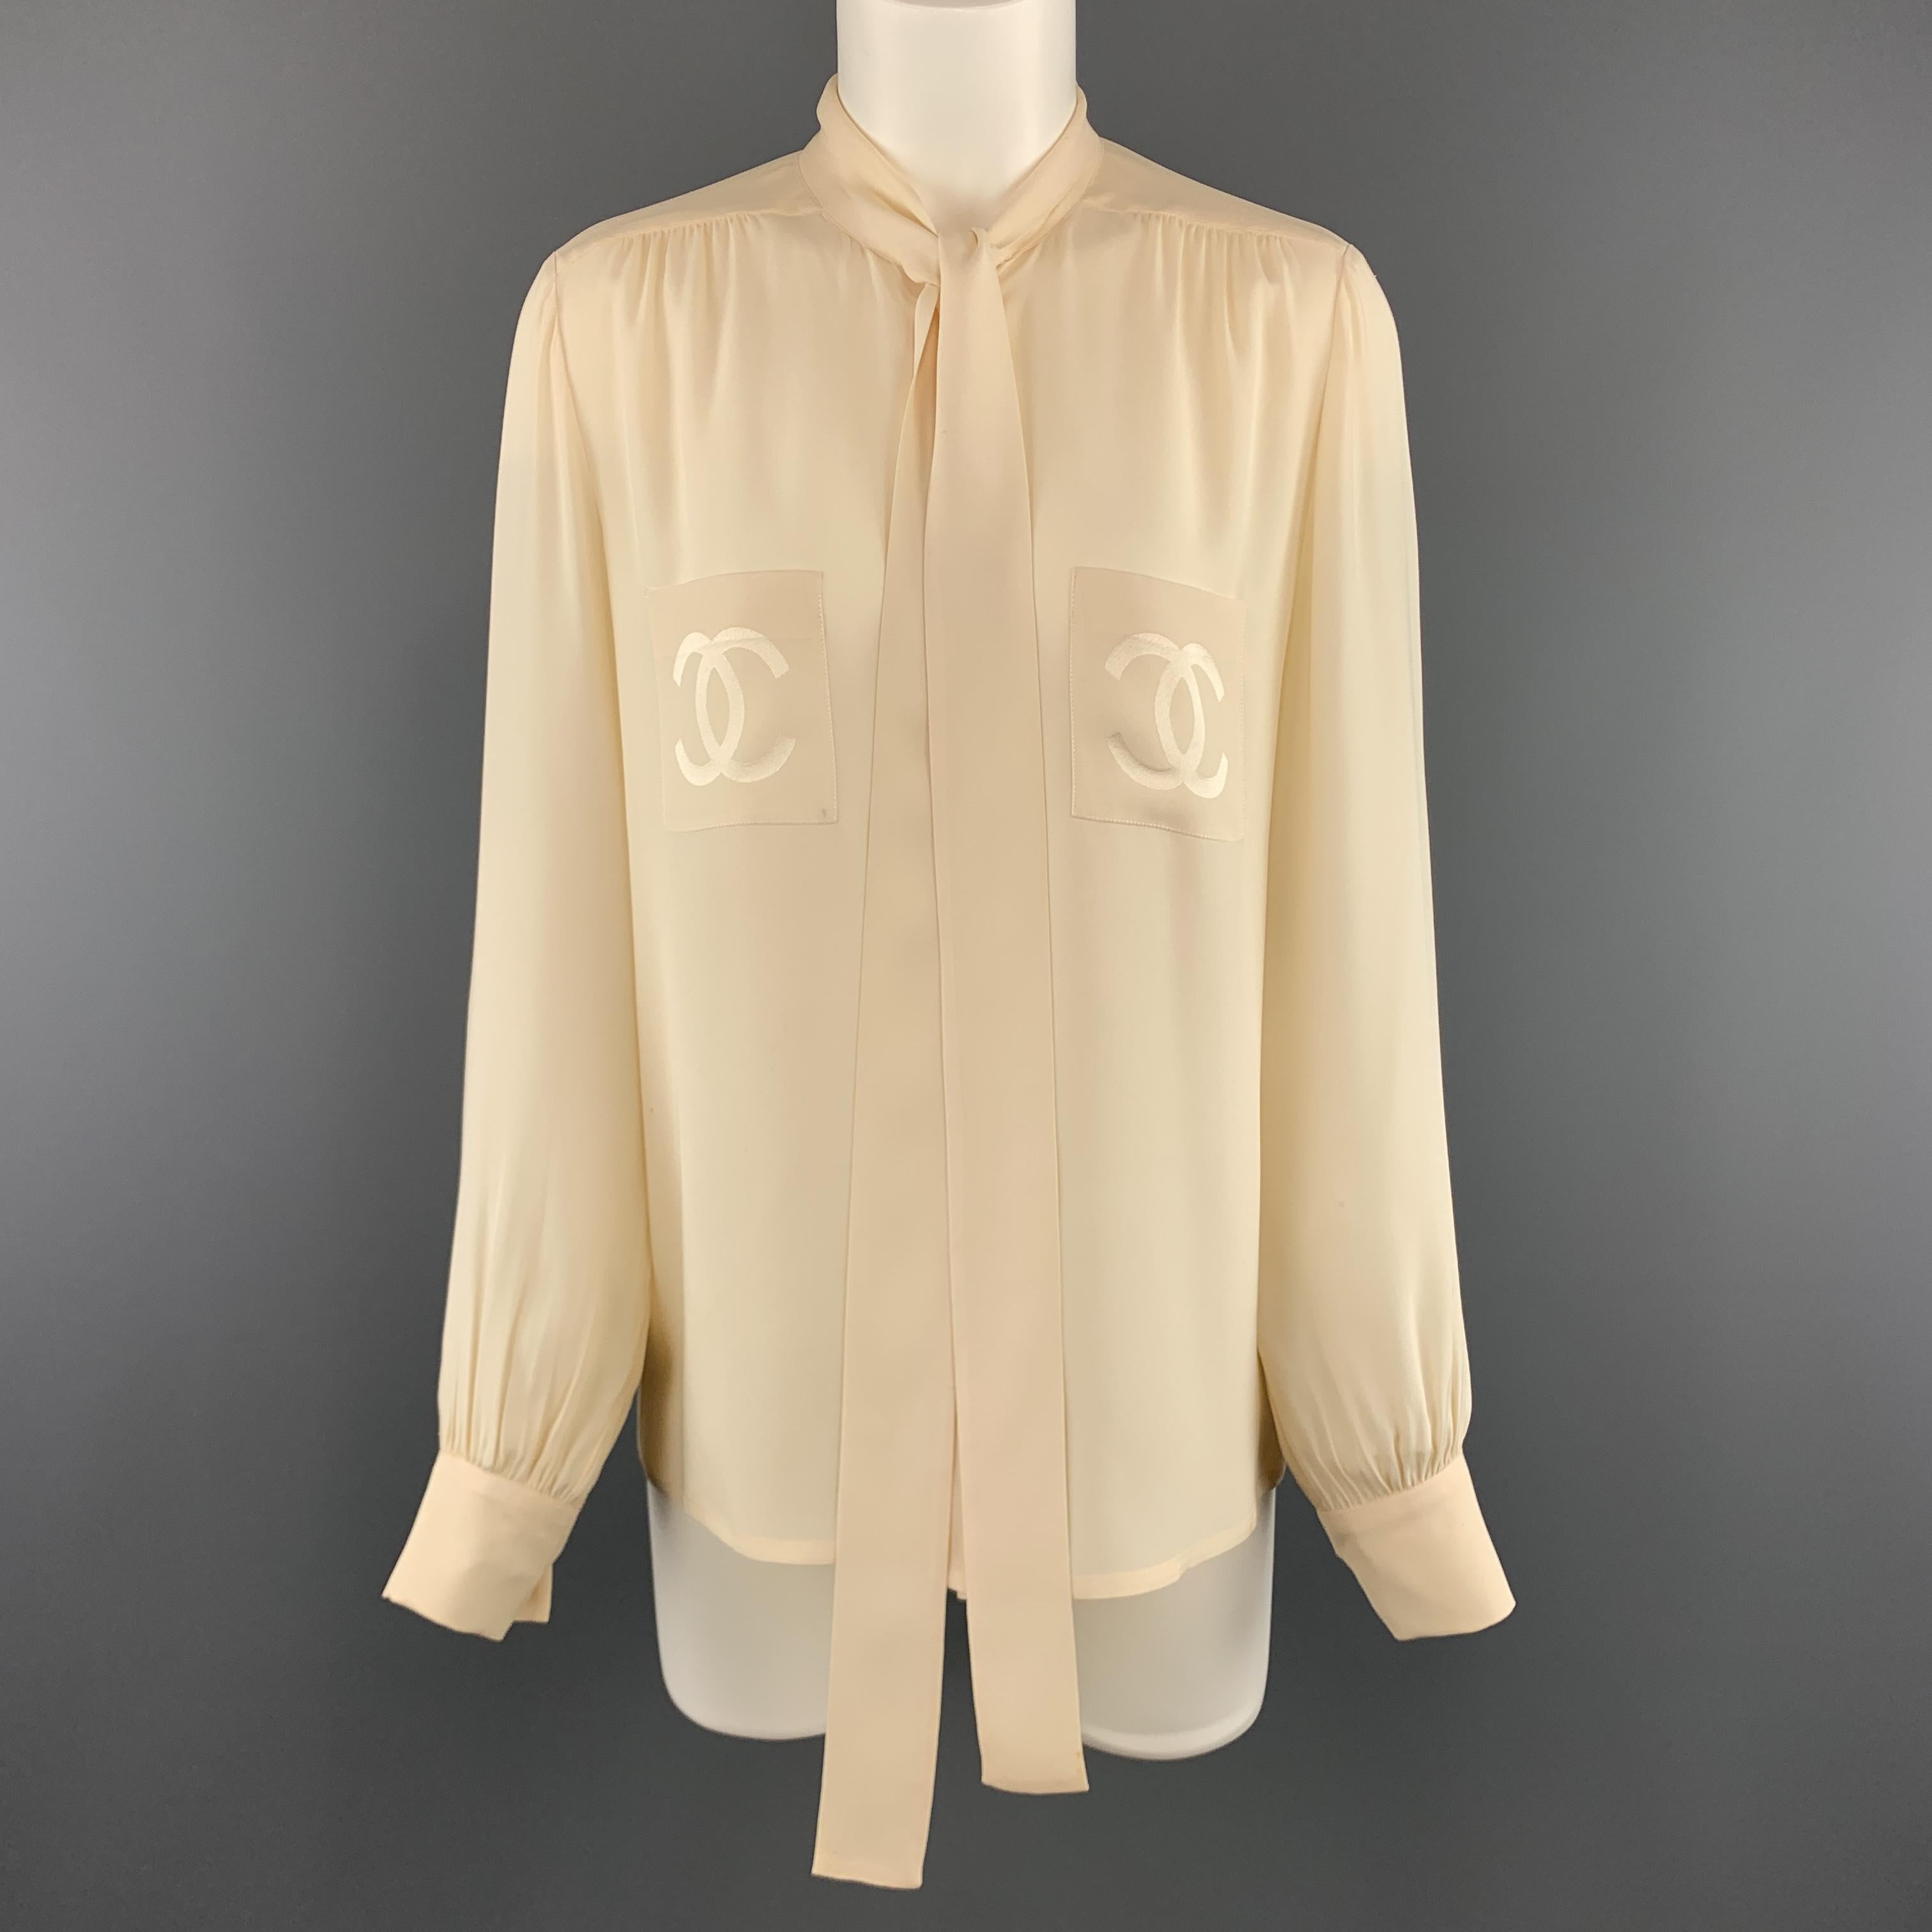 Vintage CHANEL blouse comes in creamy beige silk crepe with a tied collar, gathered shoulders and cuffs, and patch breast pockets with CC logo motifs. spots and wear throughout. As-is. Made in France.

Good Pre-Owned Condition.
Marked: FR